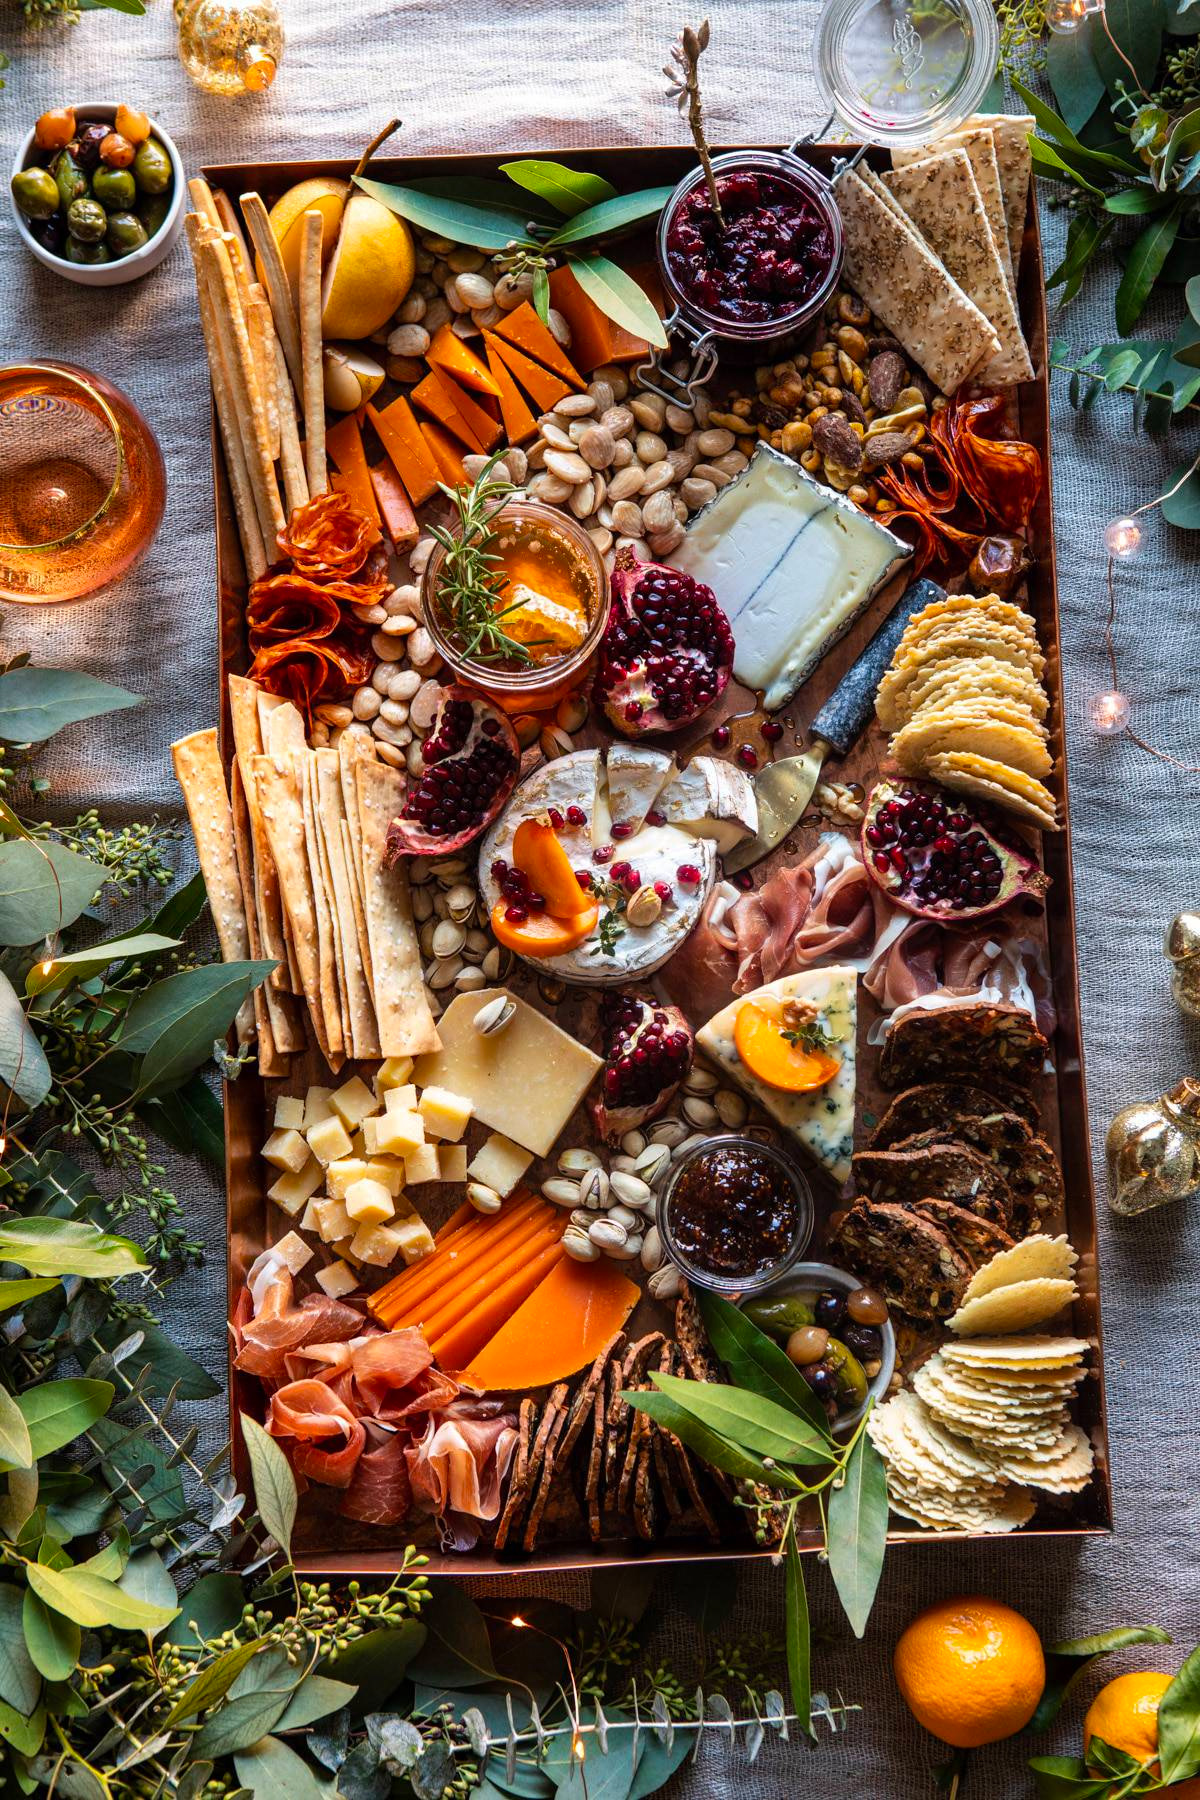 Half Baked Harvest's Cheese board includes nuts, crackers, meats, and cheeses.